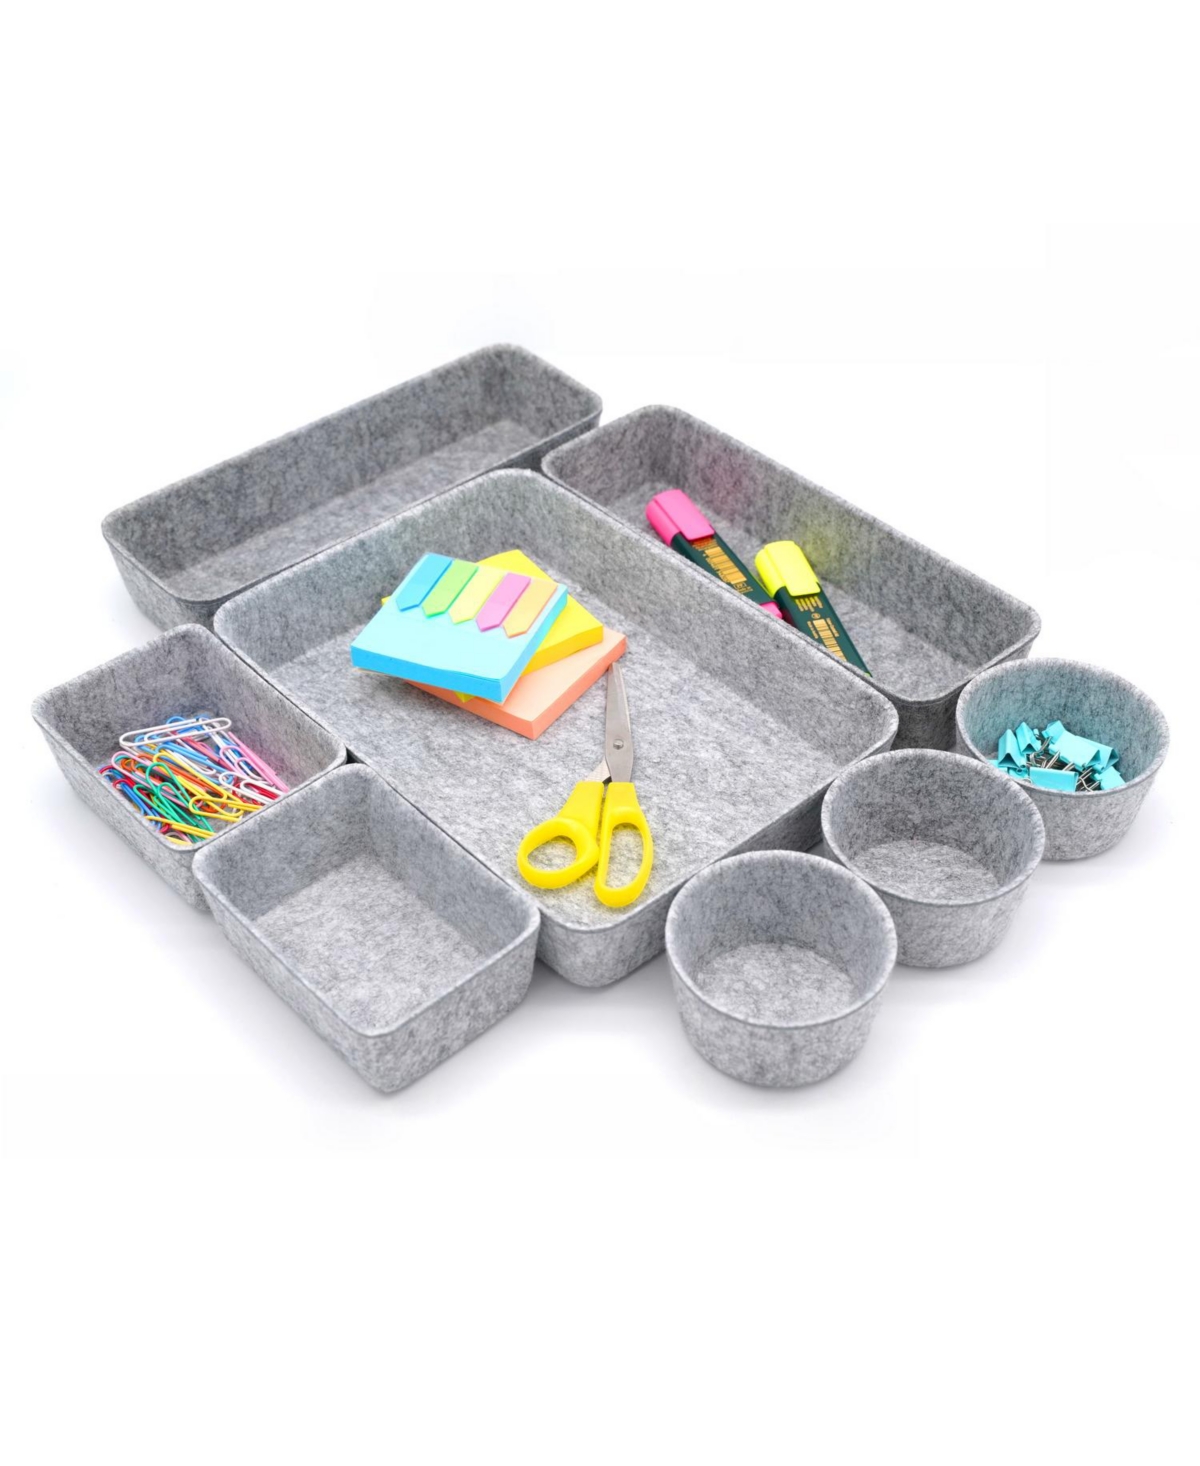 Welaxy 8 Piece Felt Drawer Organizer Set With Round Cups And Trays In Gray